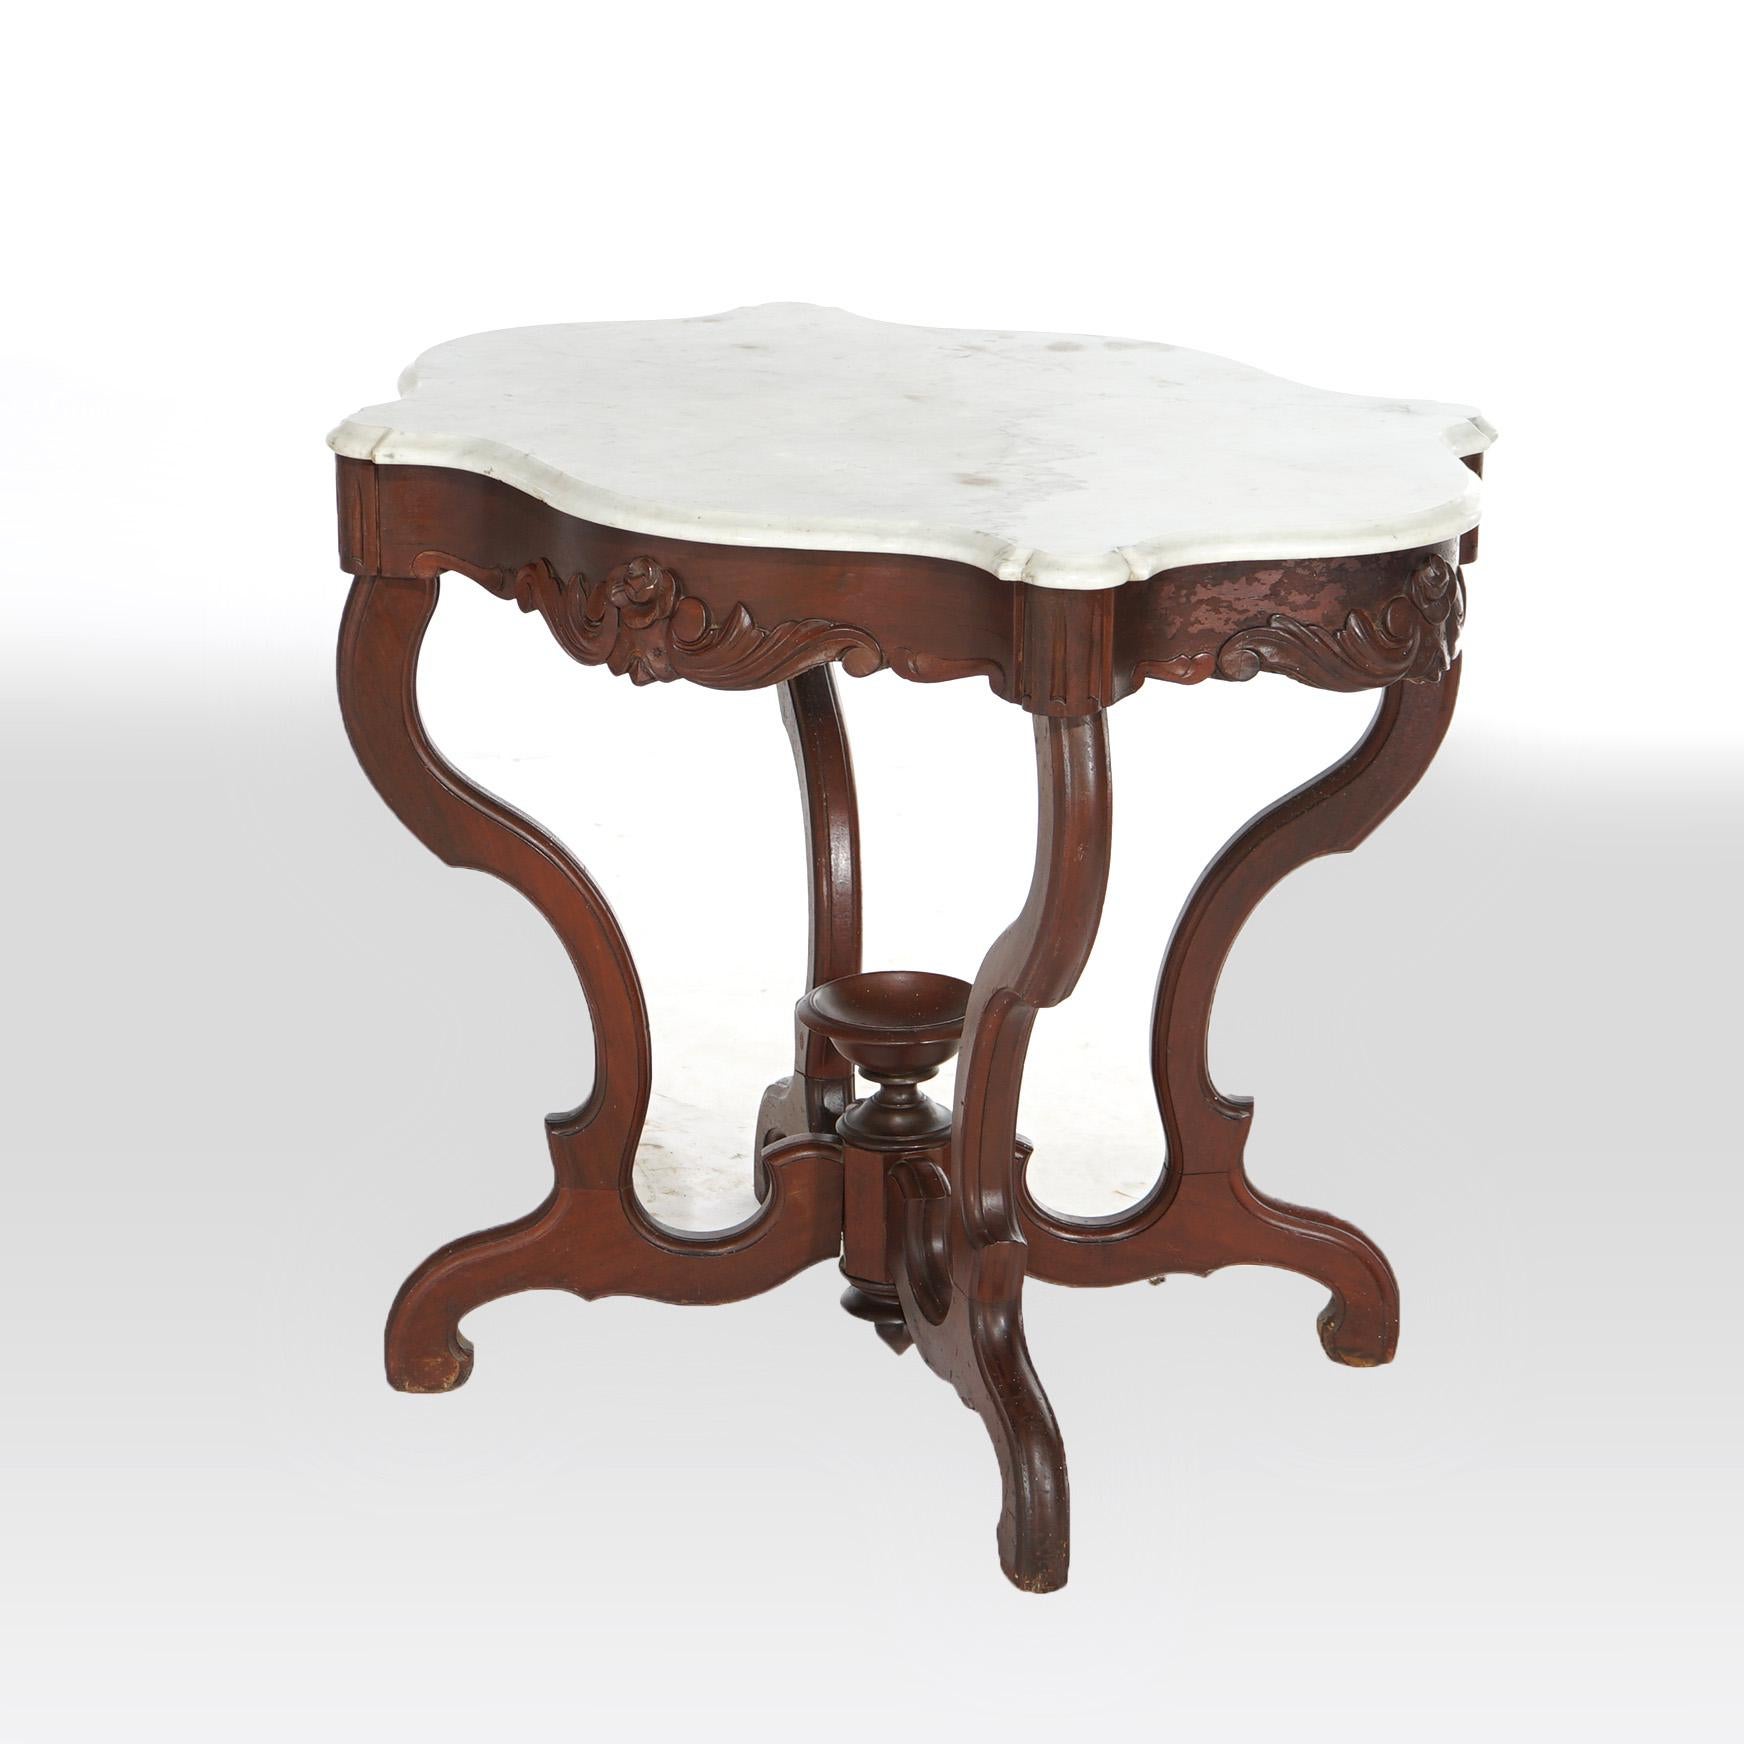 American Antique Victorian Turtle Top Marble & Carved Walnut Parlor Table Circa 1890